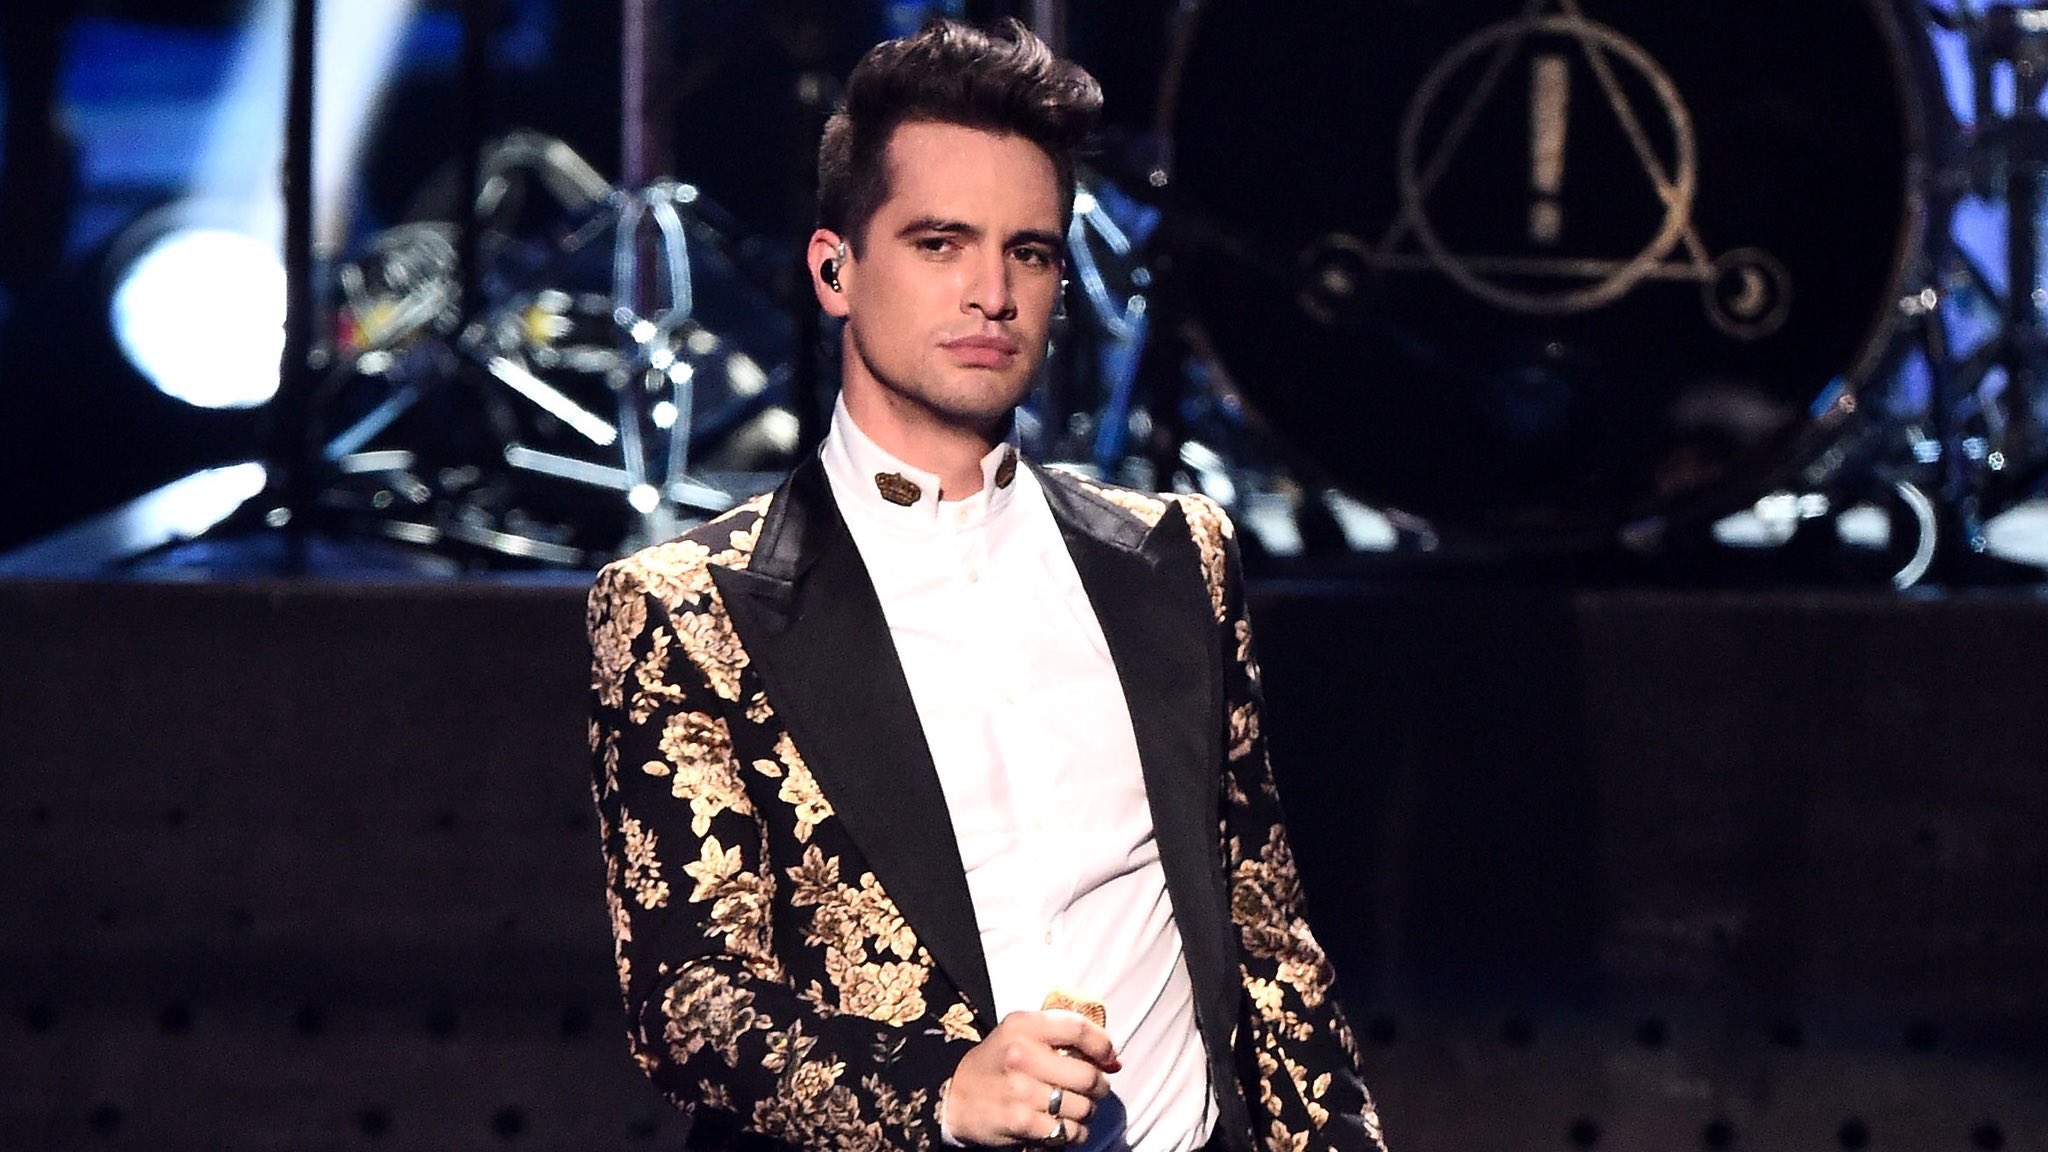 Y ALL, IT S BRENDON URIE S BIRTHDAY I APPRECIATE HIM AND EVERYTHING HE DOES. HAPPY BIRTHDAY, KING ! 